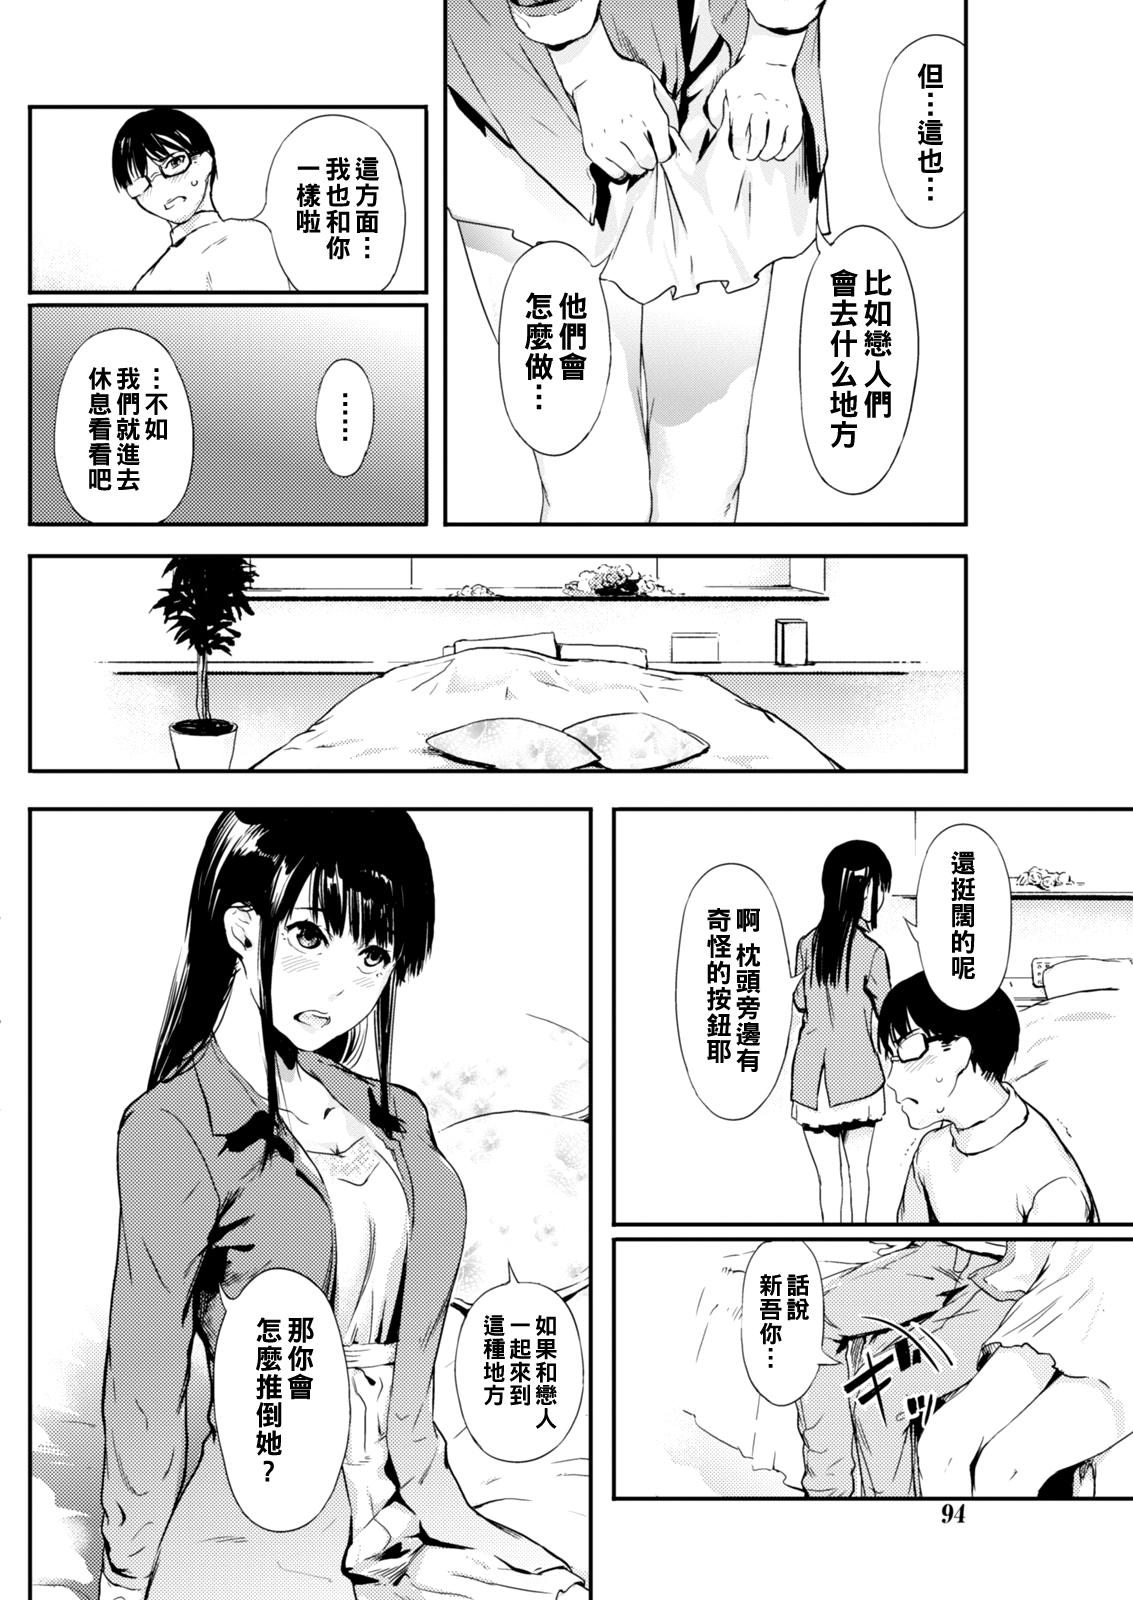 Anal Play 漫画ガール（Chinese） Tanned - Page 10